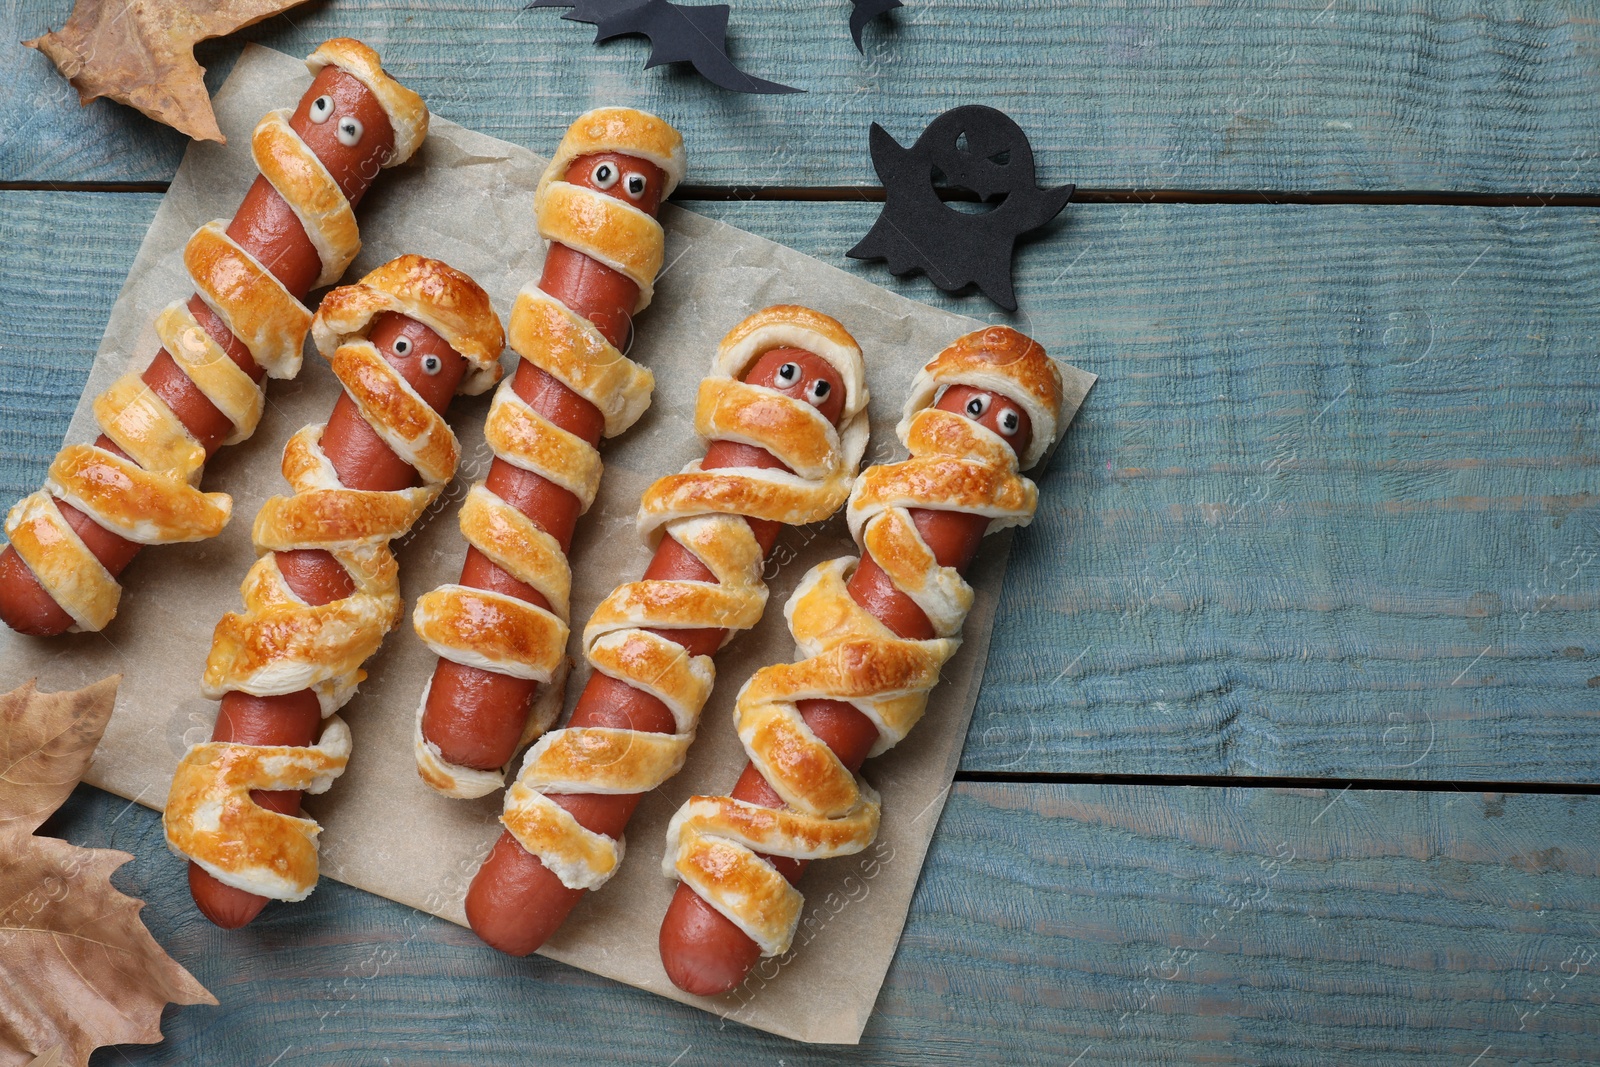 Photo of Cute sausage mummies served on blue wooden table, flat lay with space for text. Halloween party food